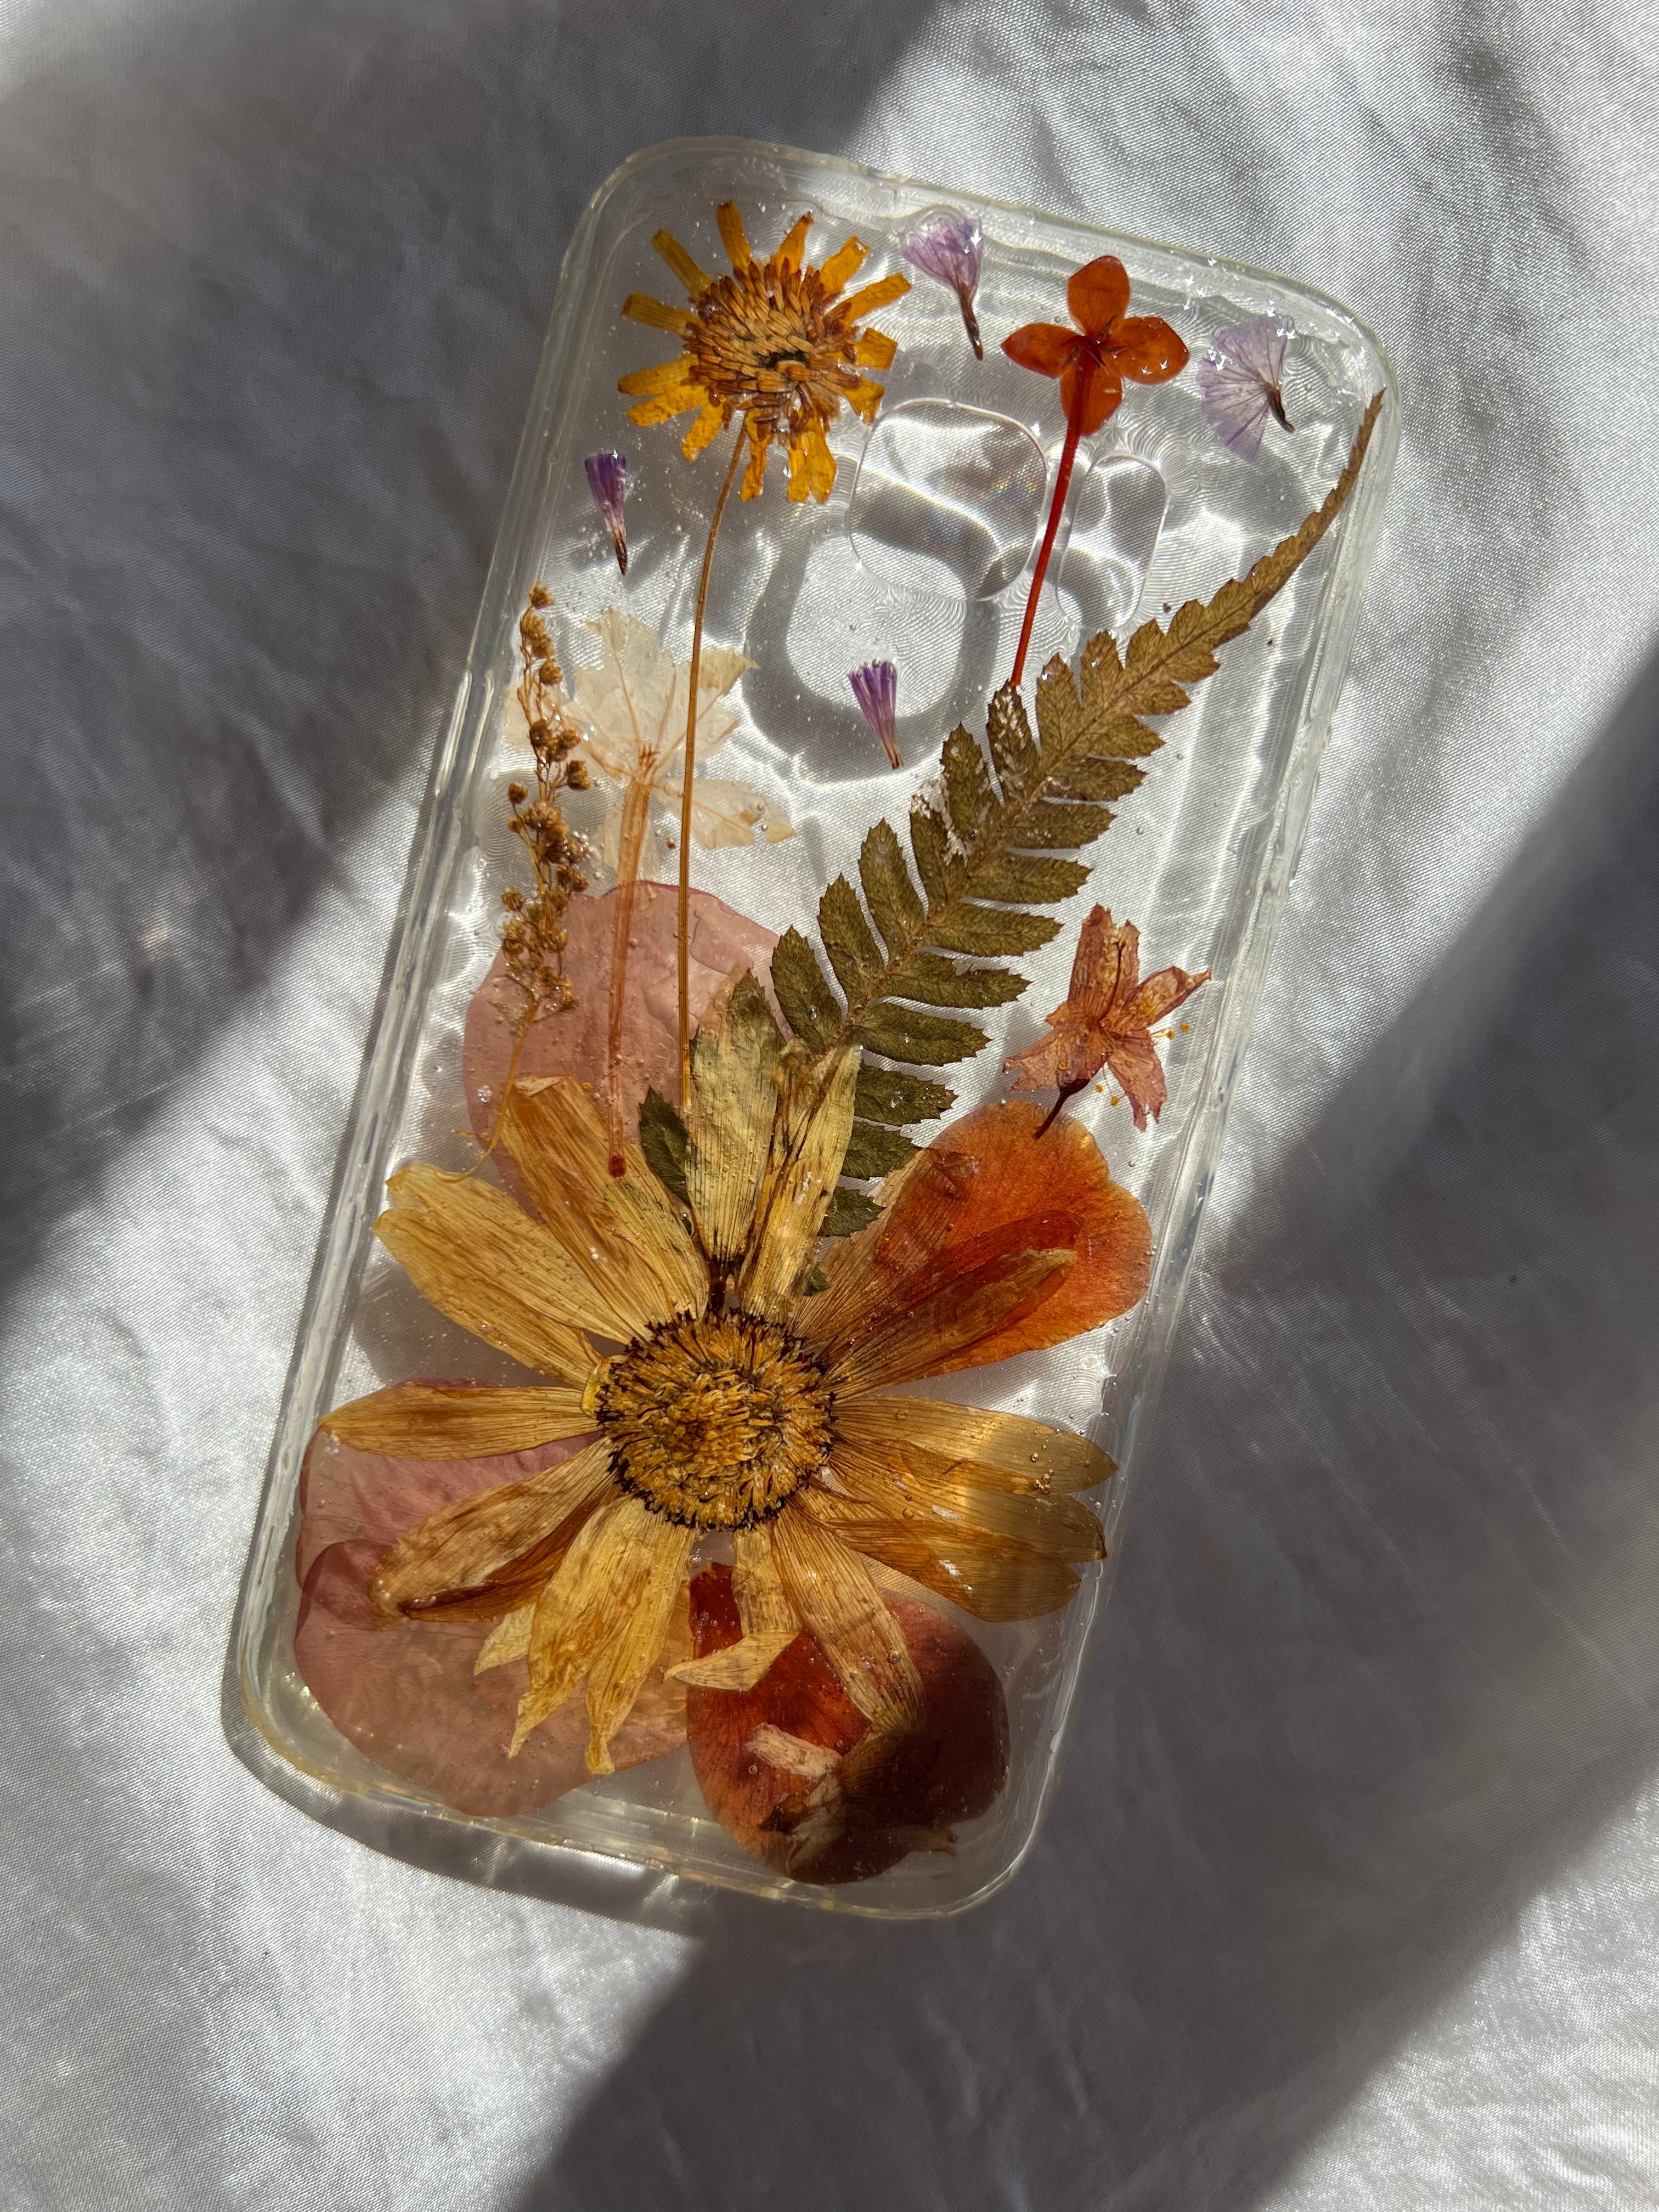 pressed flower phone case, botanical phone case, pressed flower art, handmade phone case, real pressed flowers, australian made, botanical art, pressed flower artist, floral art, botanical preservation, resin and flowers, flowers in resin, phone accessories, samsung phone case, samsung s7 phone case, pressed yellow daisy, fern, floral